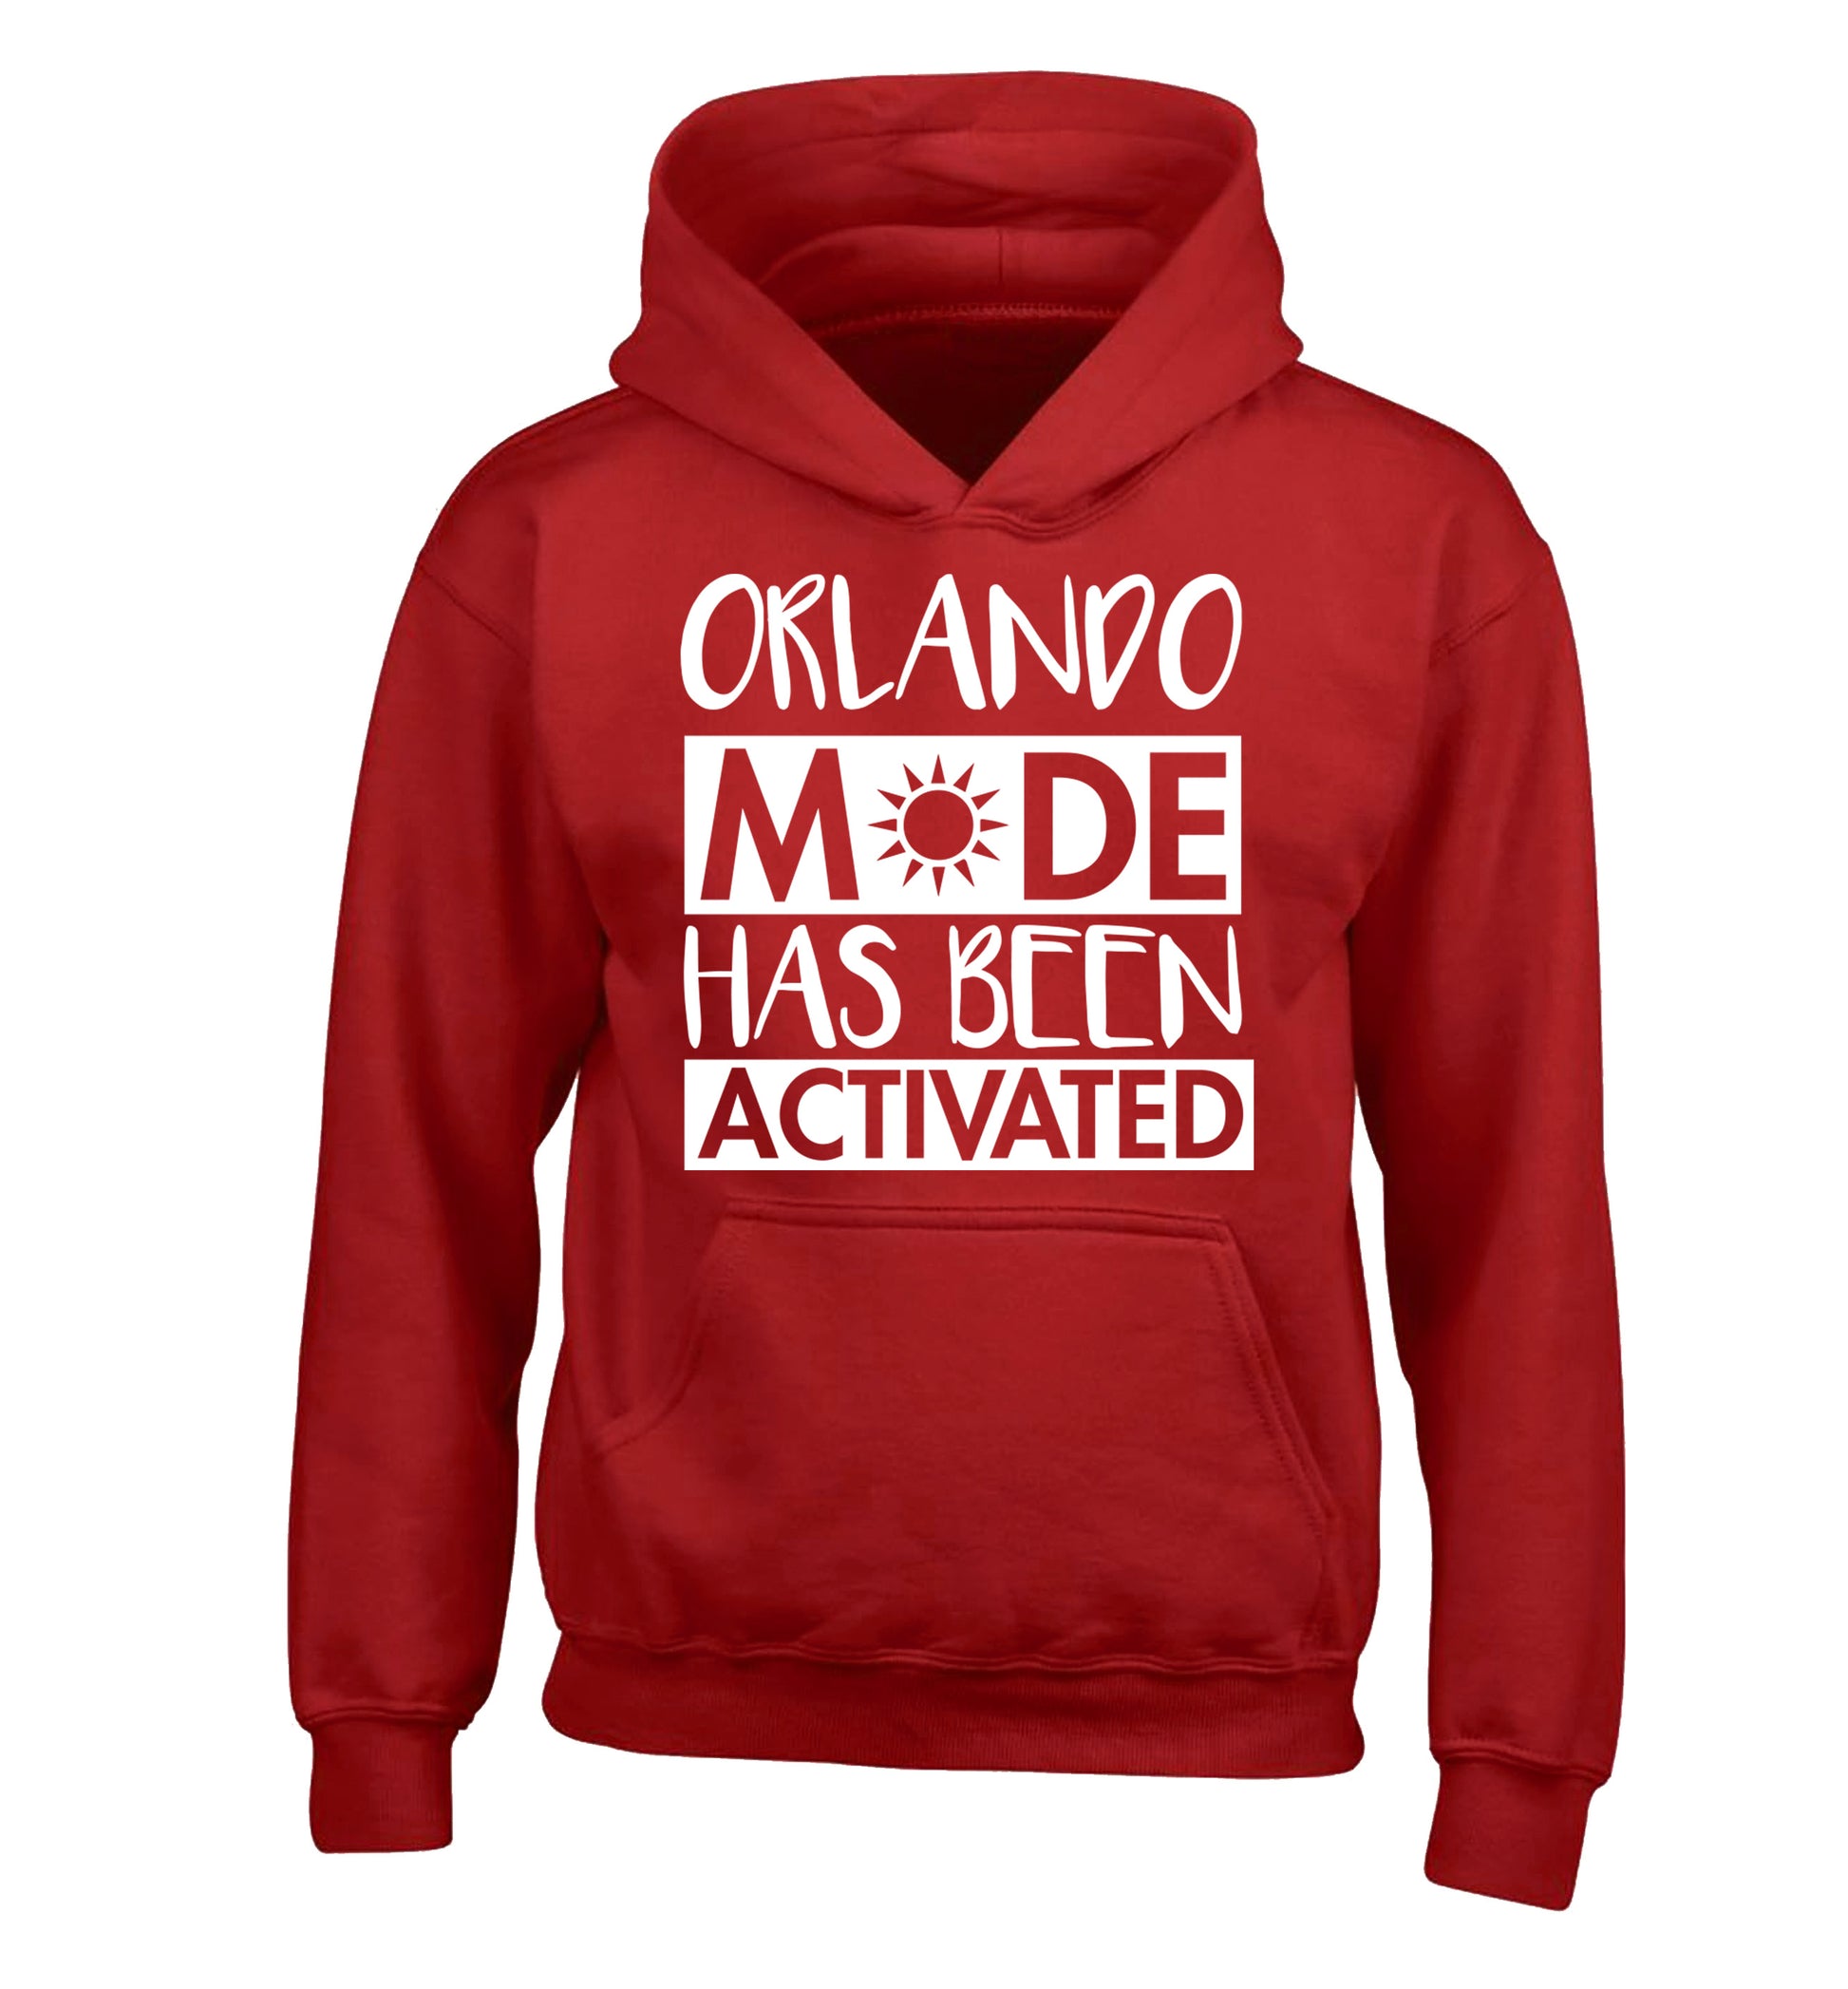 Orlando mode has been activated children's red hoodie 12-13 Years